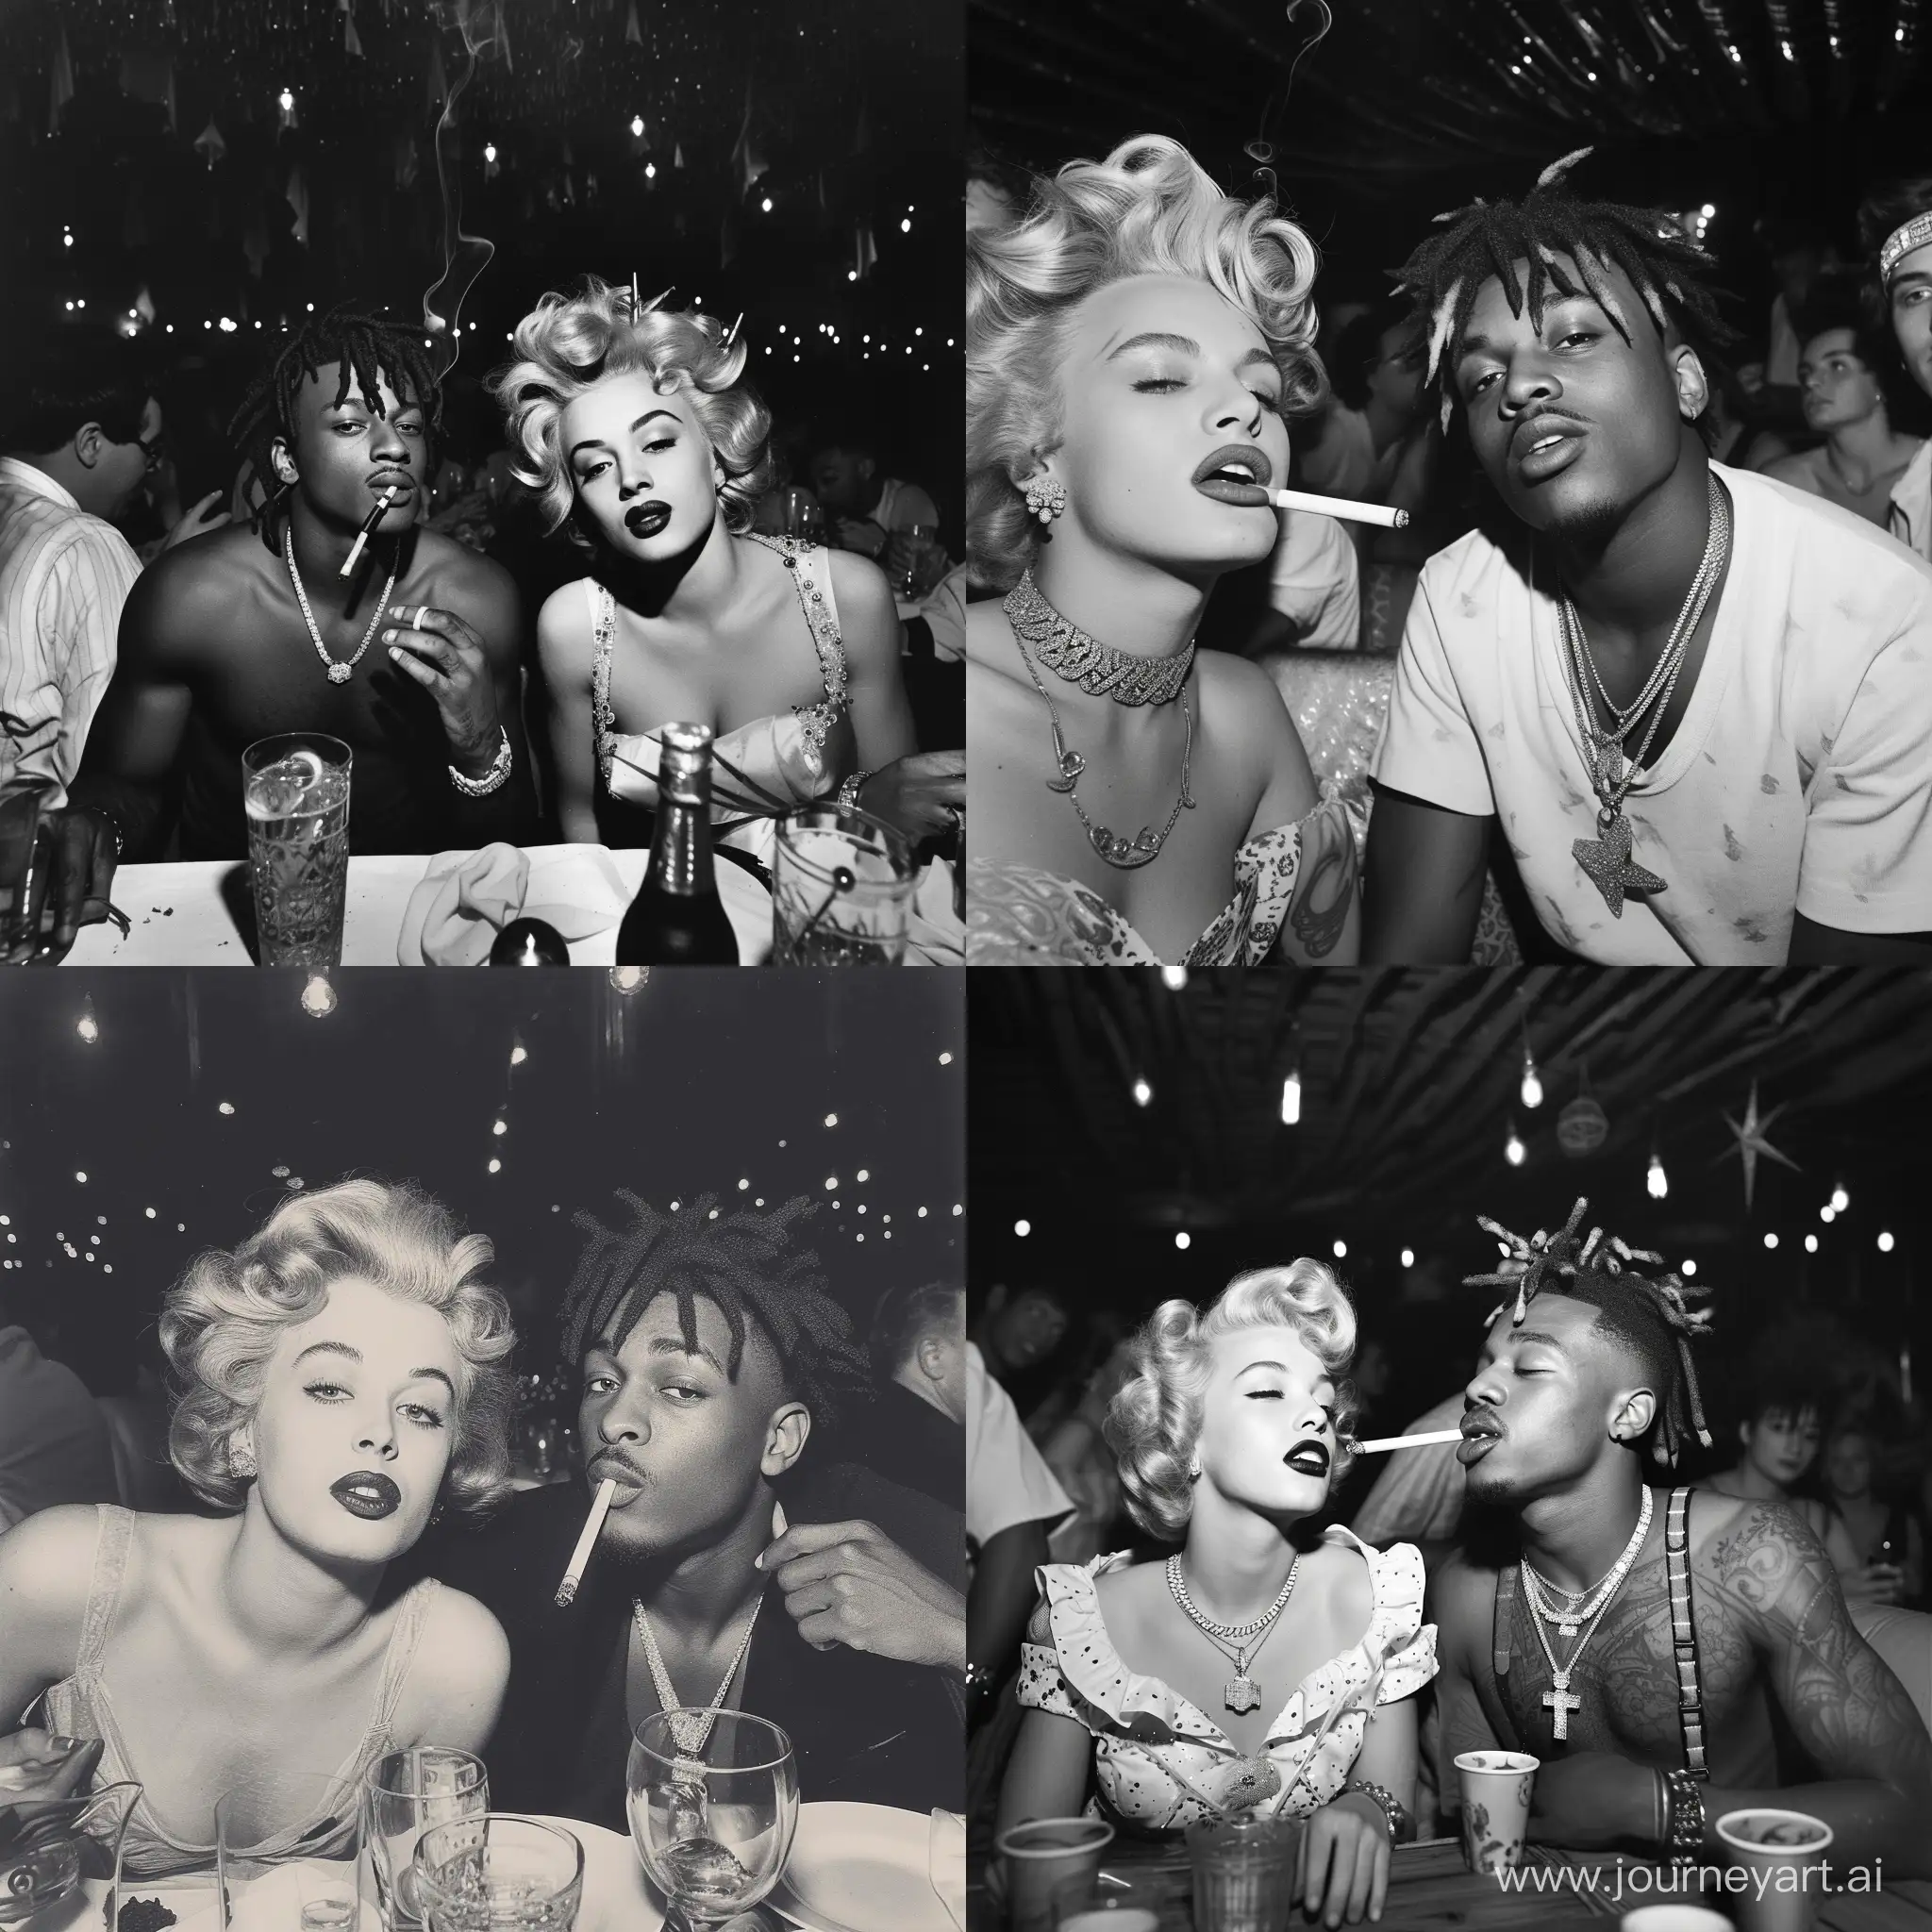 Vintage-Celebrity-Gathering-Juice-WRLD-and-Marilyn-Monroe-at-a-1950s-House-Party